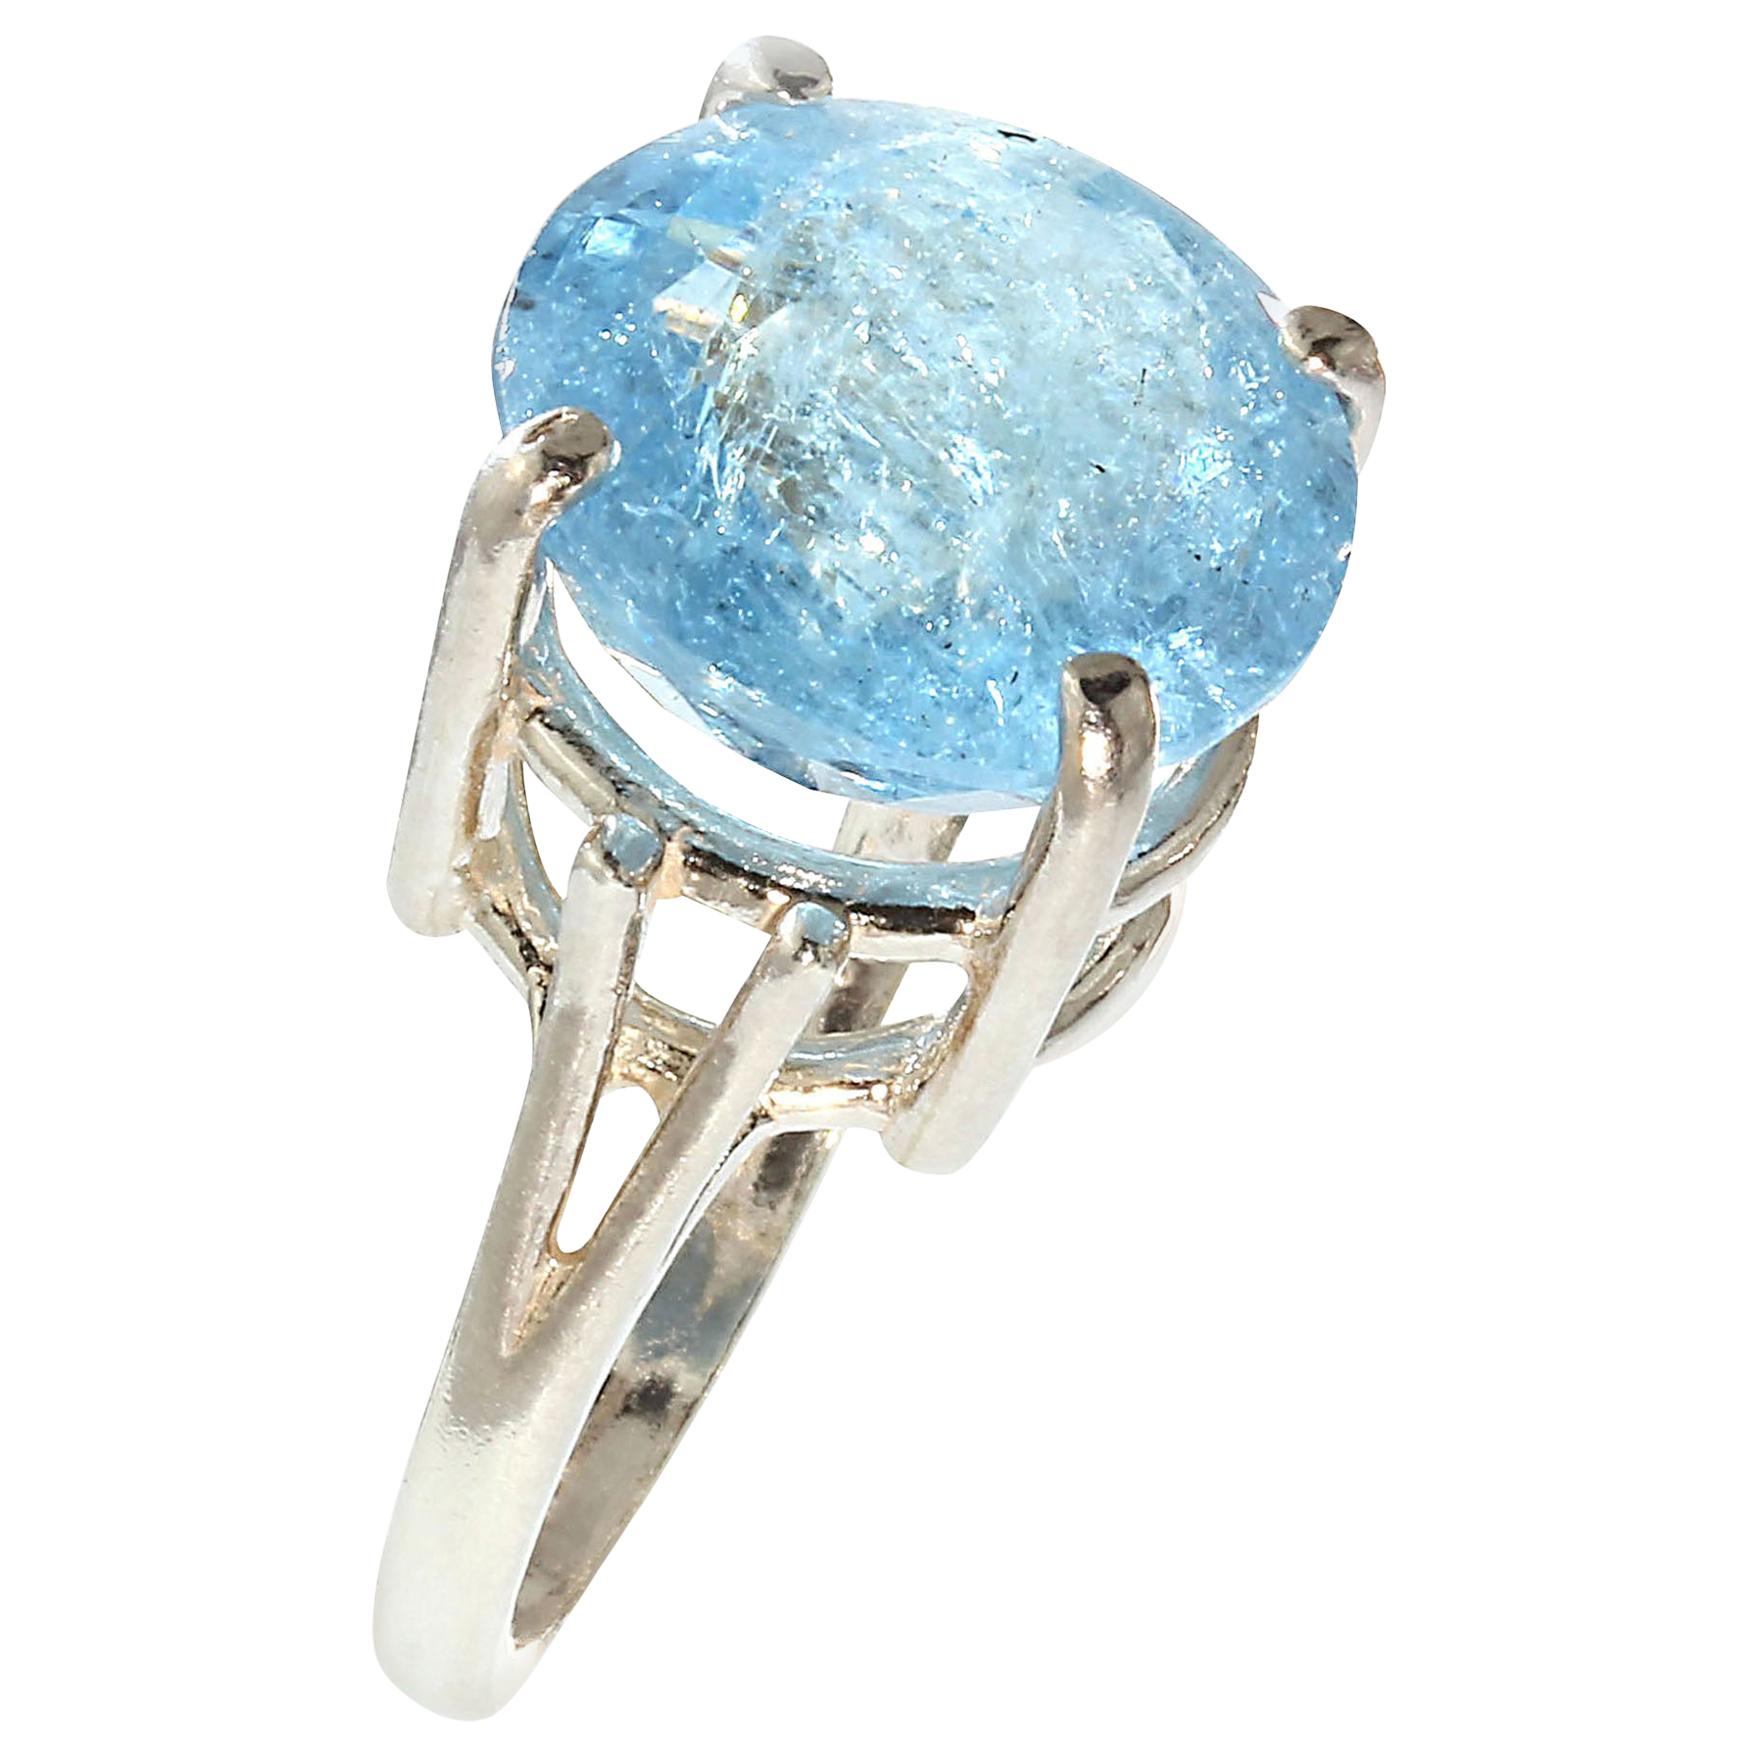 Custom made, Sterling Silver and Glittering, Round Aquamarine Ring. Round stones are so lovely and calming. This gorgeous gem is 13 MM. The  unique gemstone has a checkerboard table and interesting inclusions which enhance its color and sparkle.